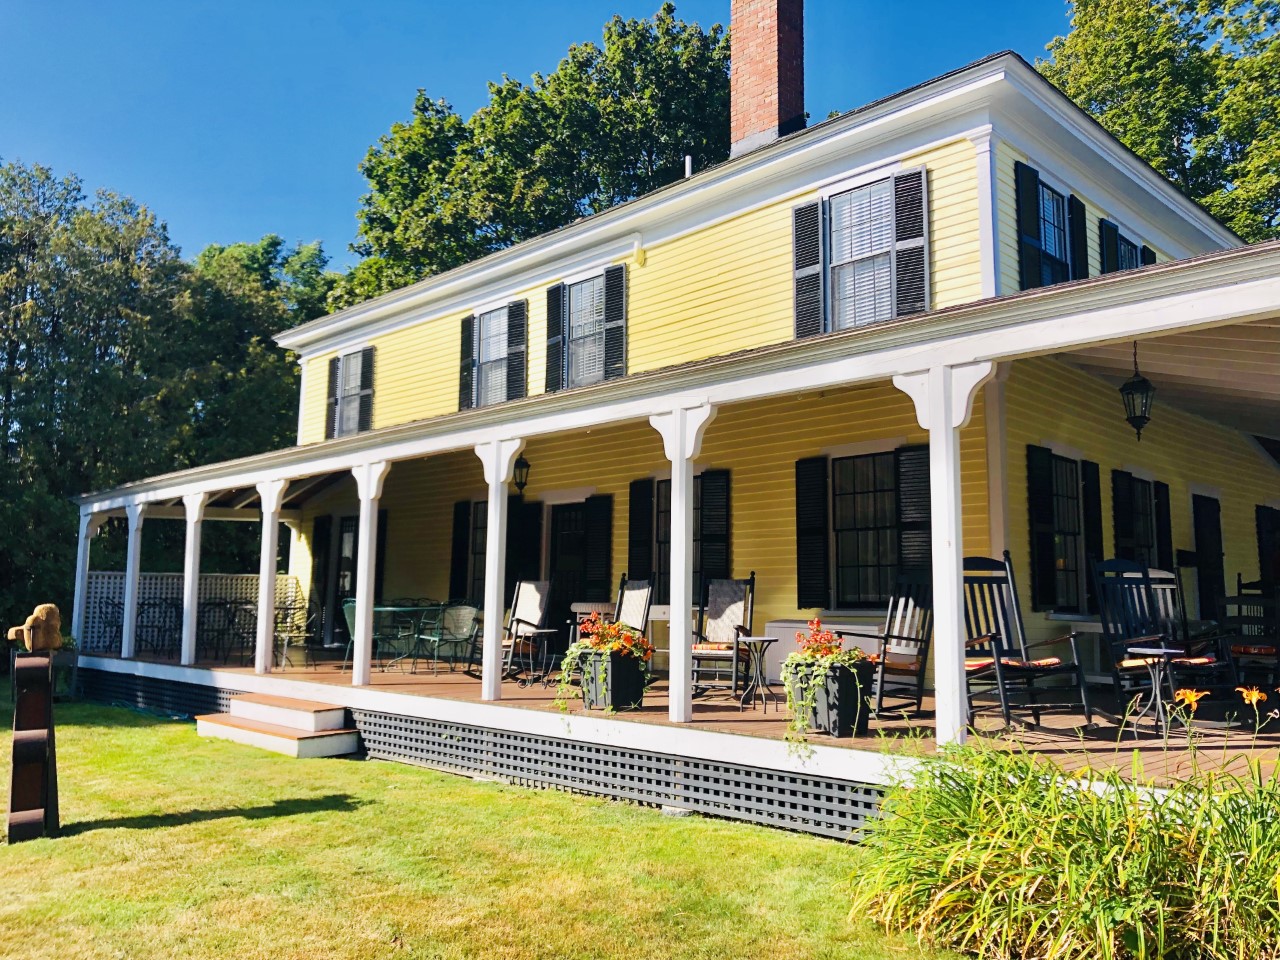 The Yellow House Bed & Breakfast Experience ~ Bar Harbor, Maine